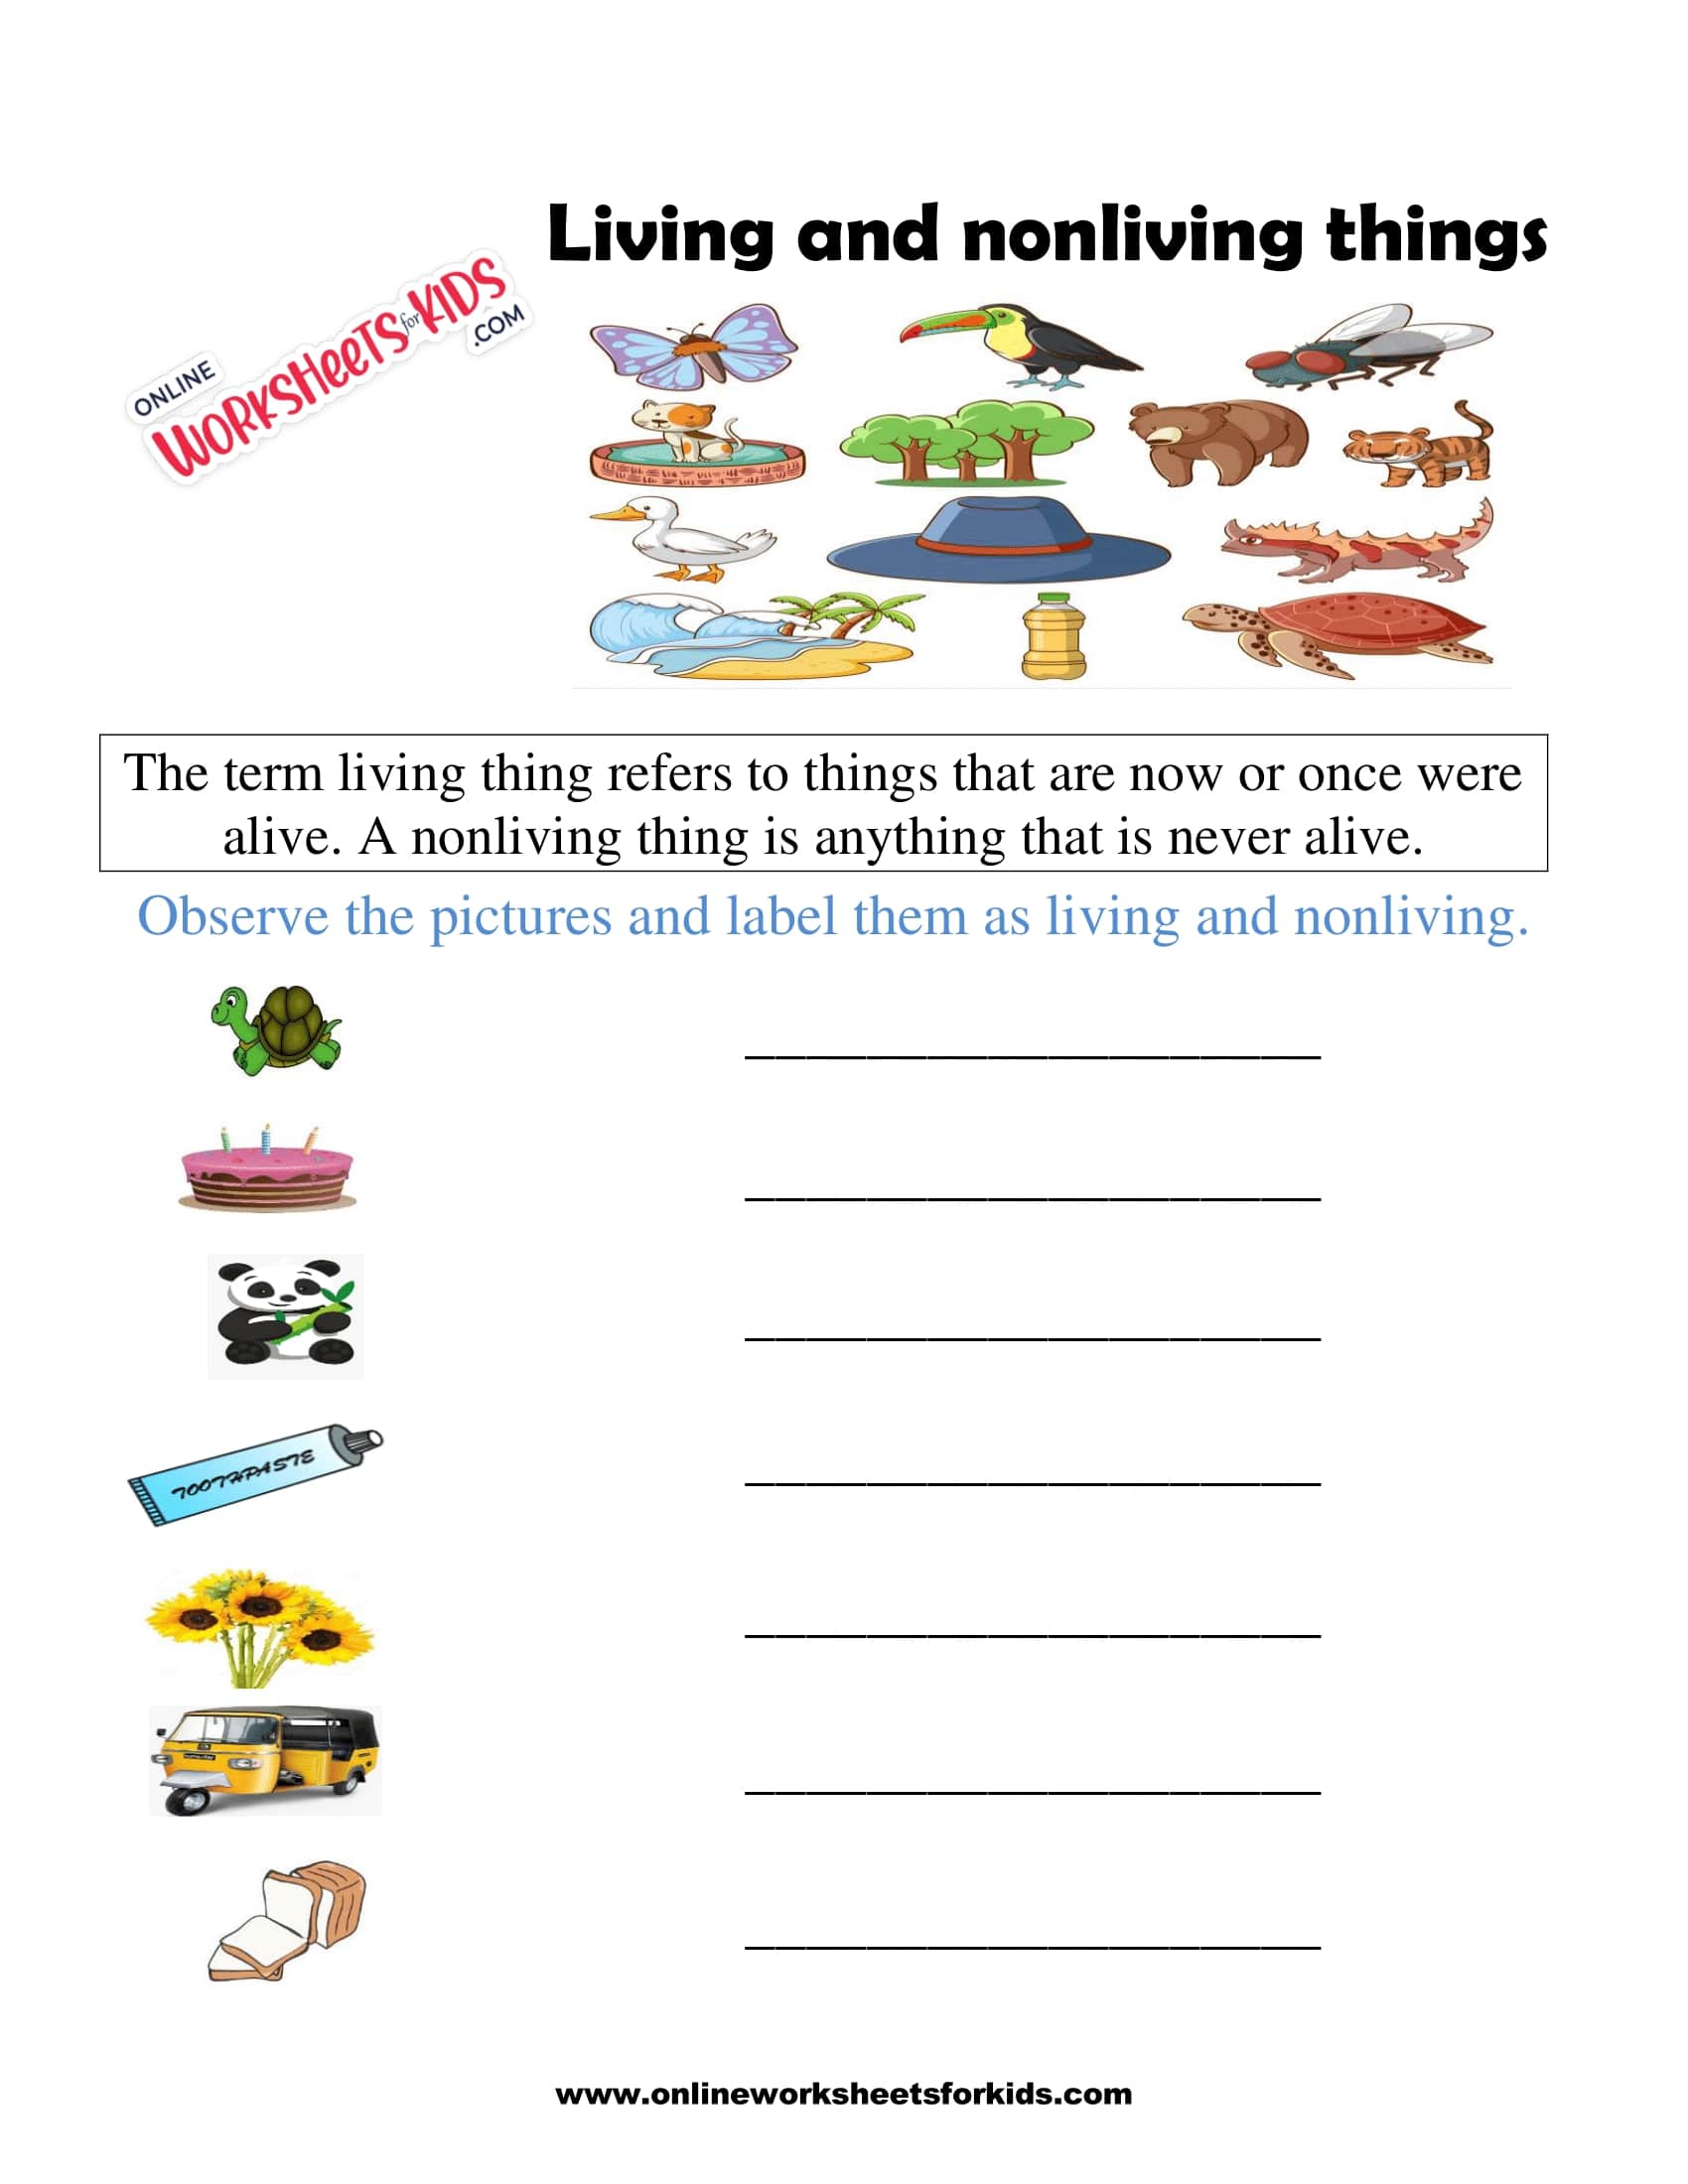 living-things-worksheets-k5-learning-living-and-non-living-things